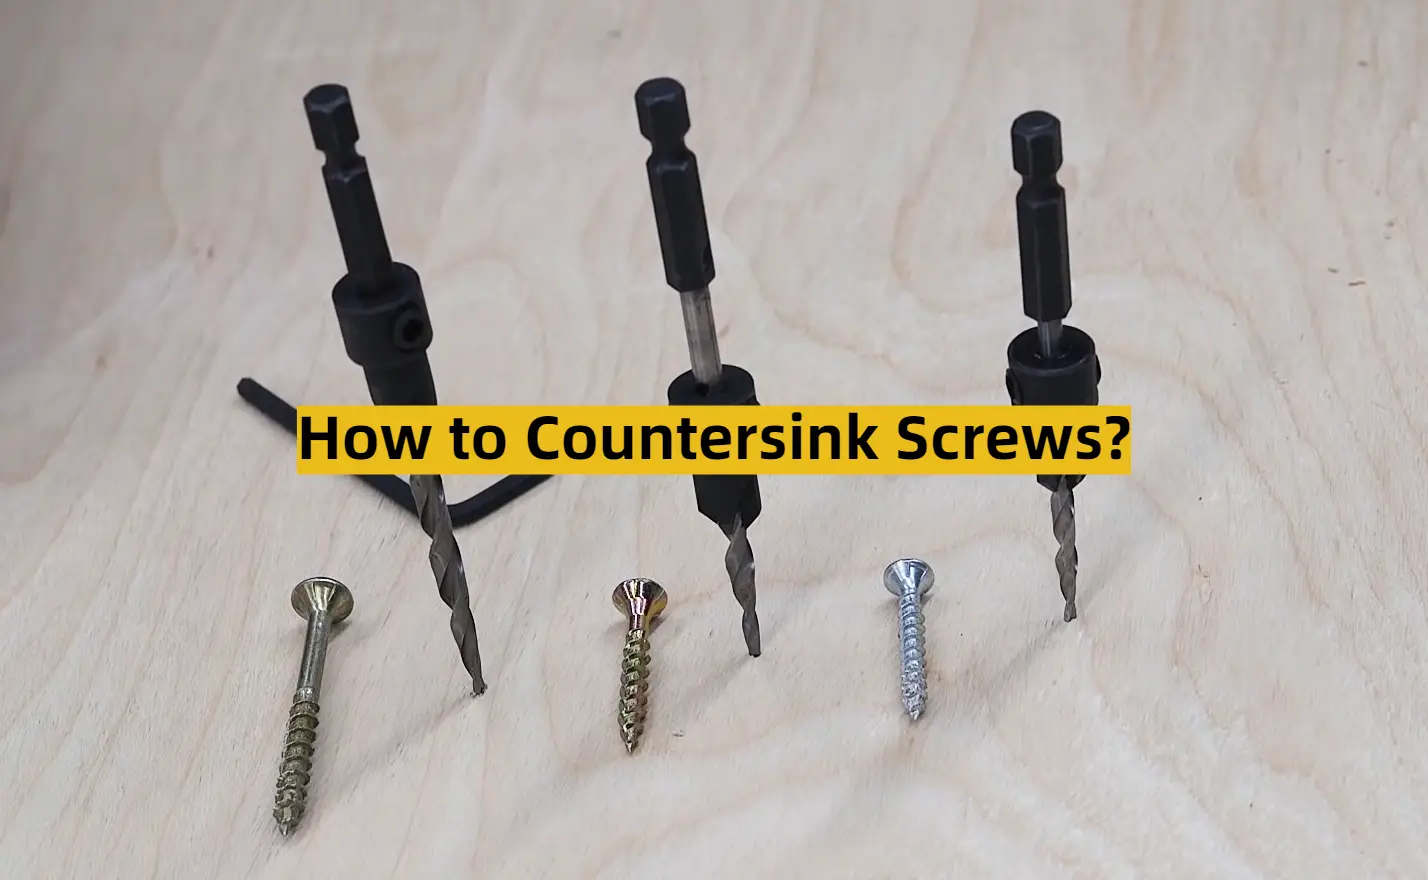 How to Countersink Screws?